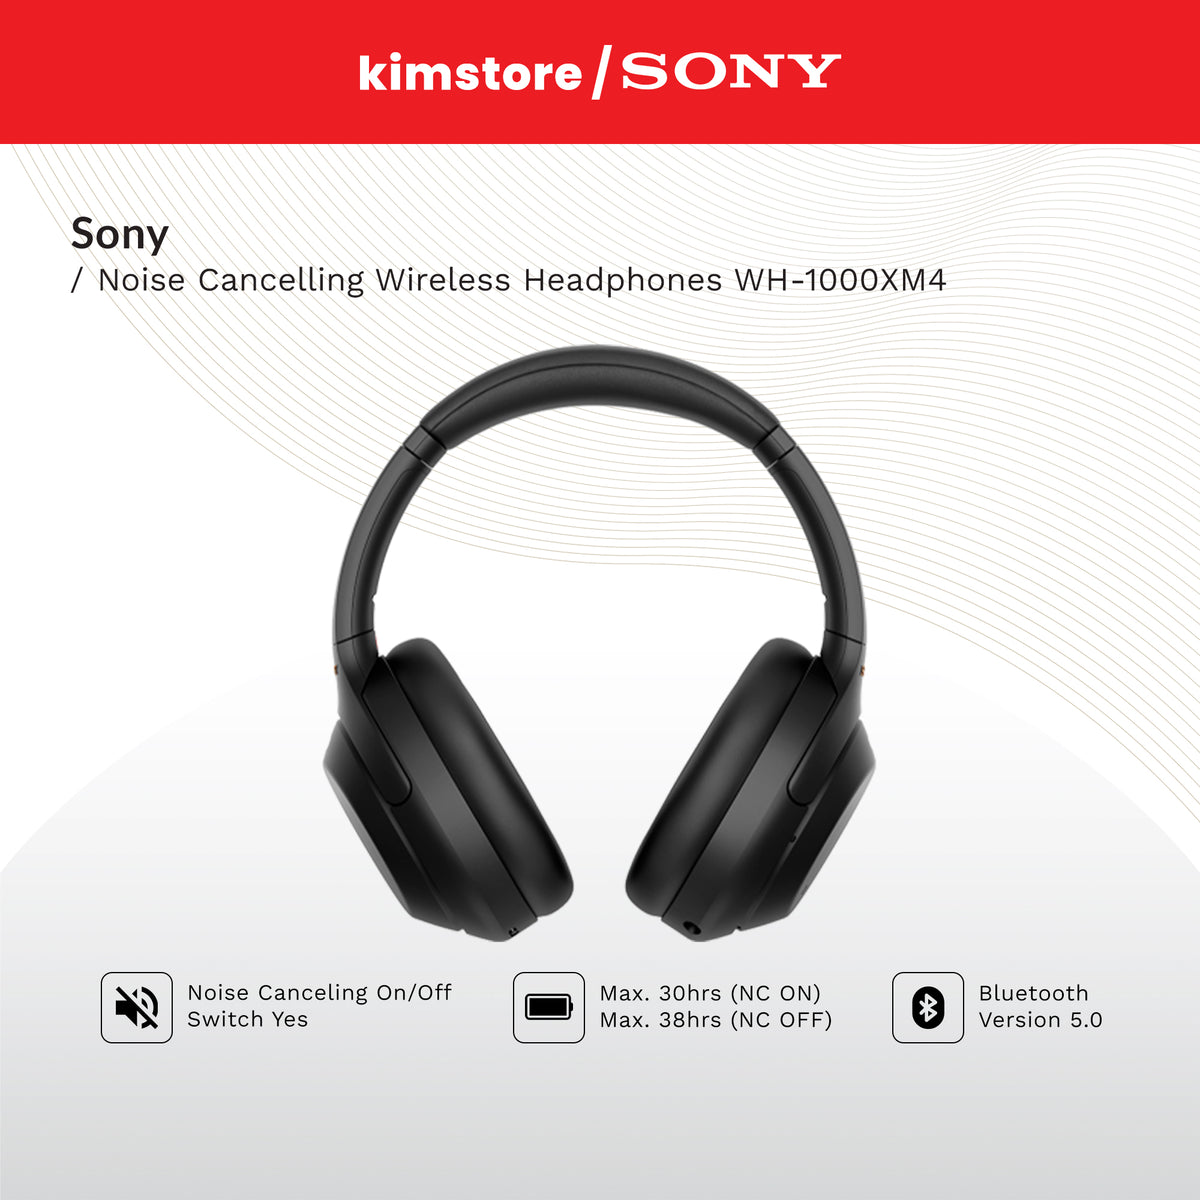 SONY Noise Cancelling Wireless Headphones WH-1000XM4